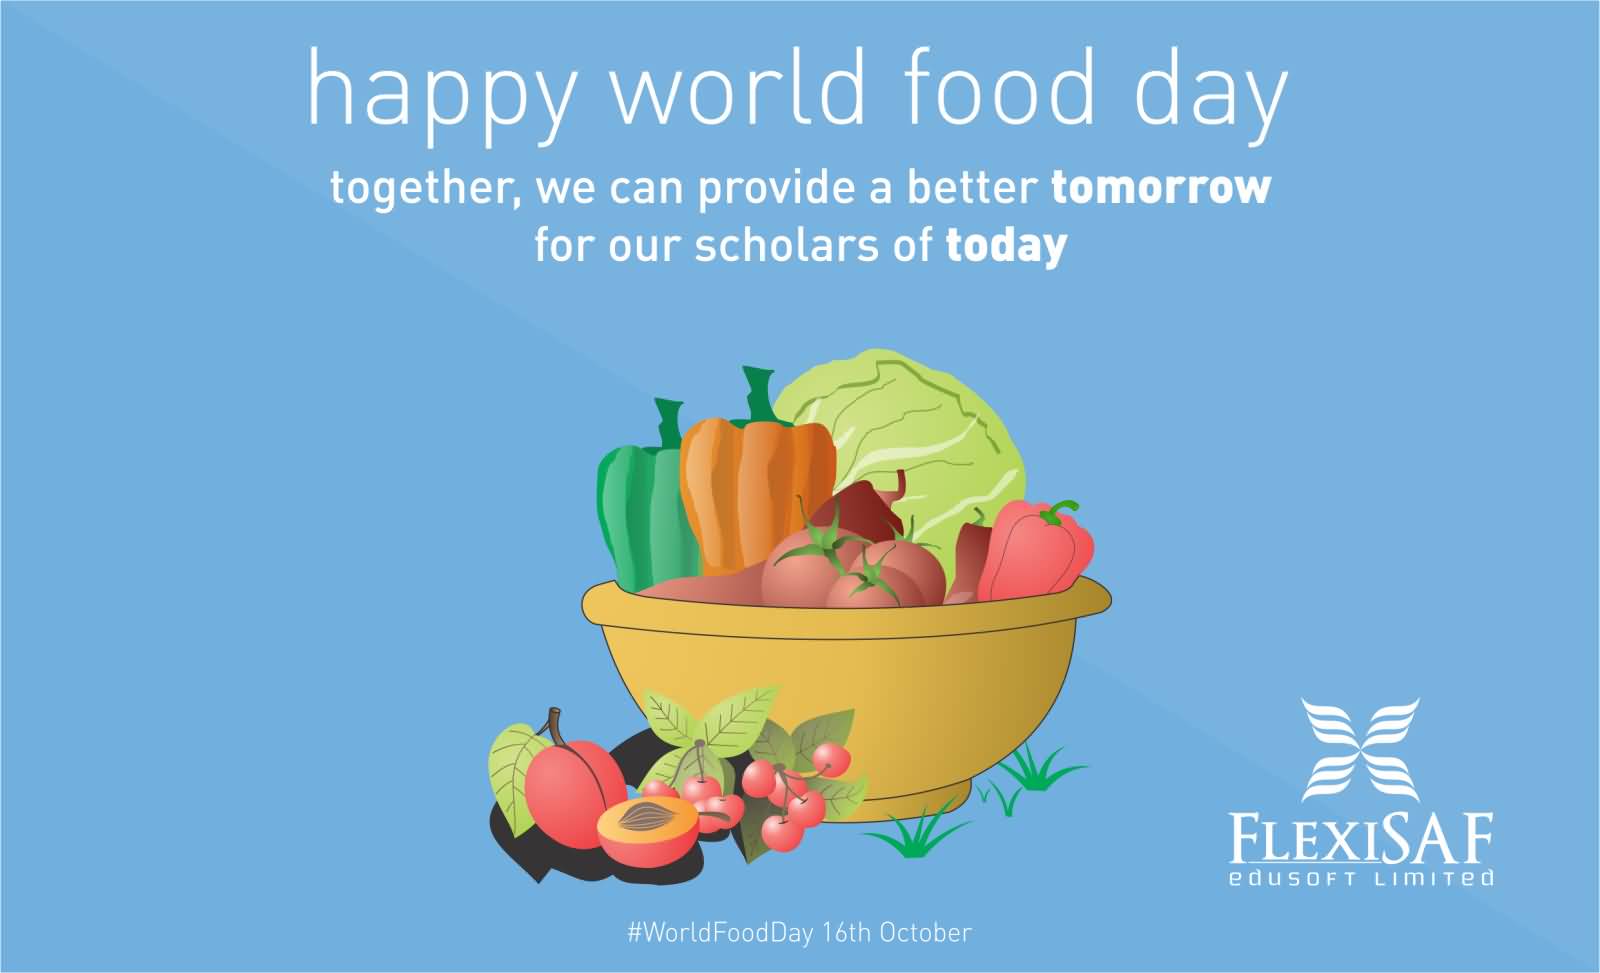 Happy World Food Day Together We Can Provide A Better Tomorrow For Our Scholars Of Today